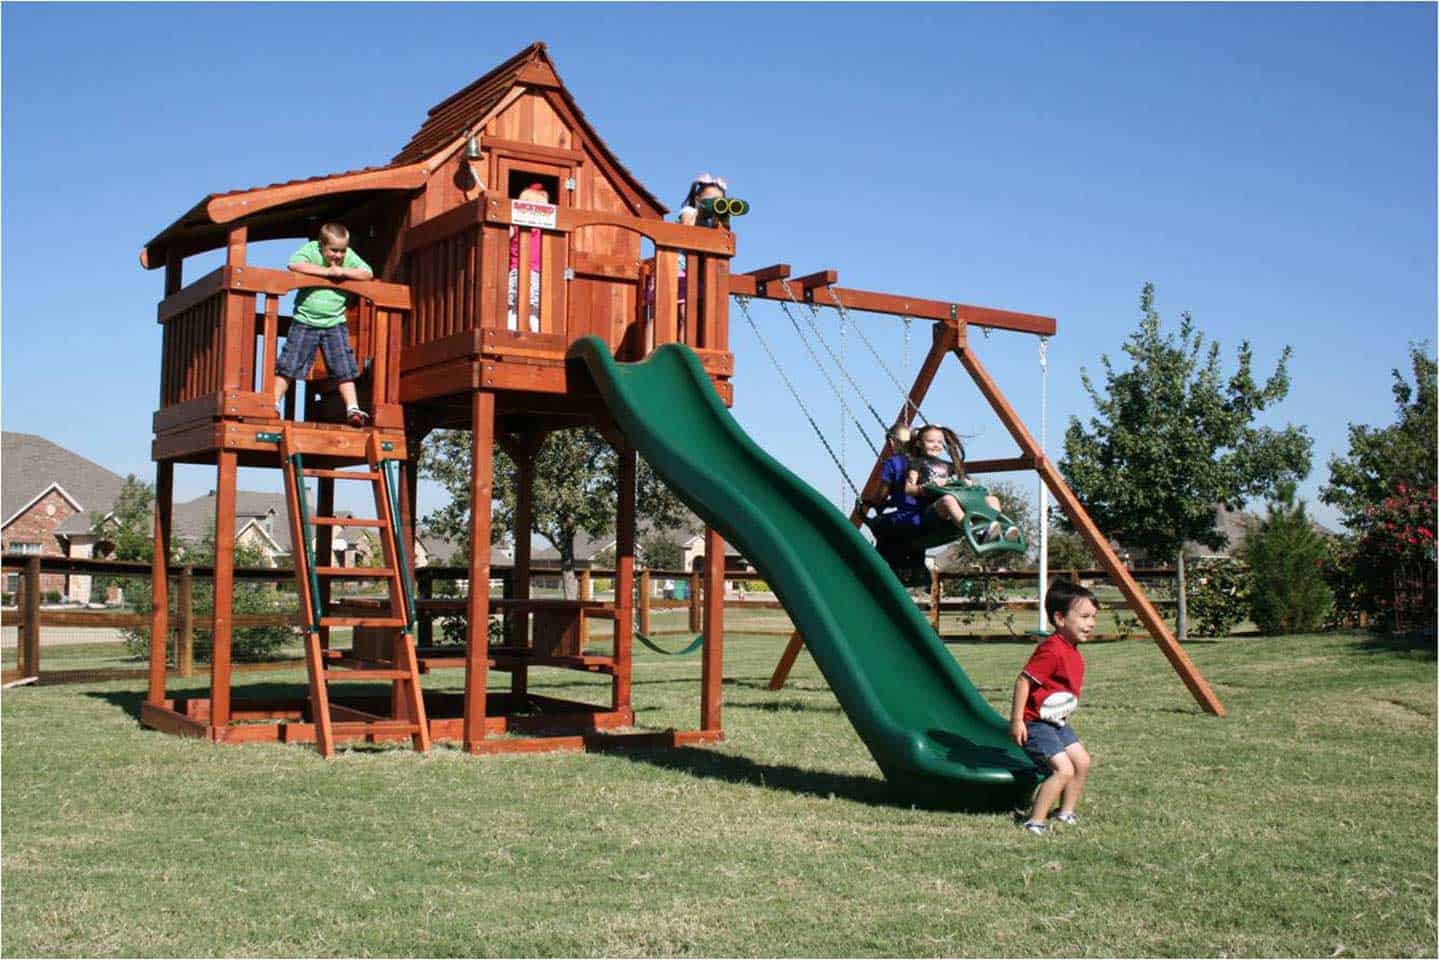 mustang, picnic table, cabin, rock wall, wooden swing set, swing set, swings, slide, swing set for kids, kids, children, play, playground, playset, sets, accessories, backyard swing set